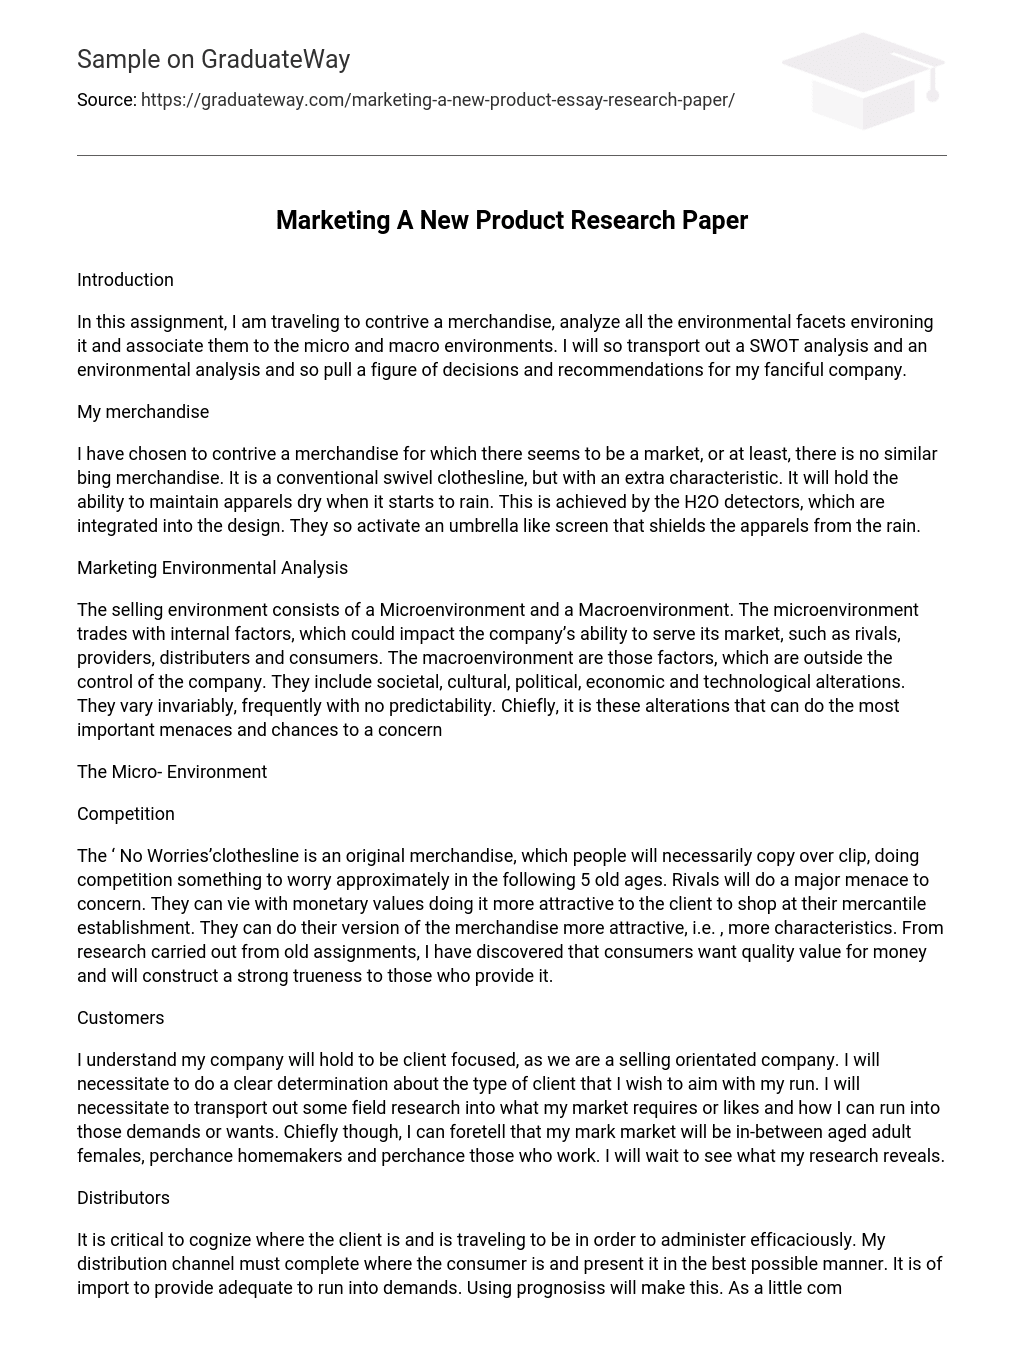 Marketing A New Product Research Paper